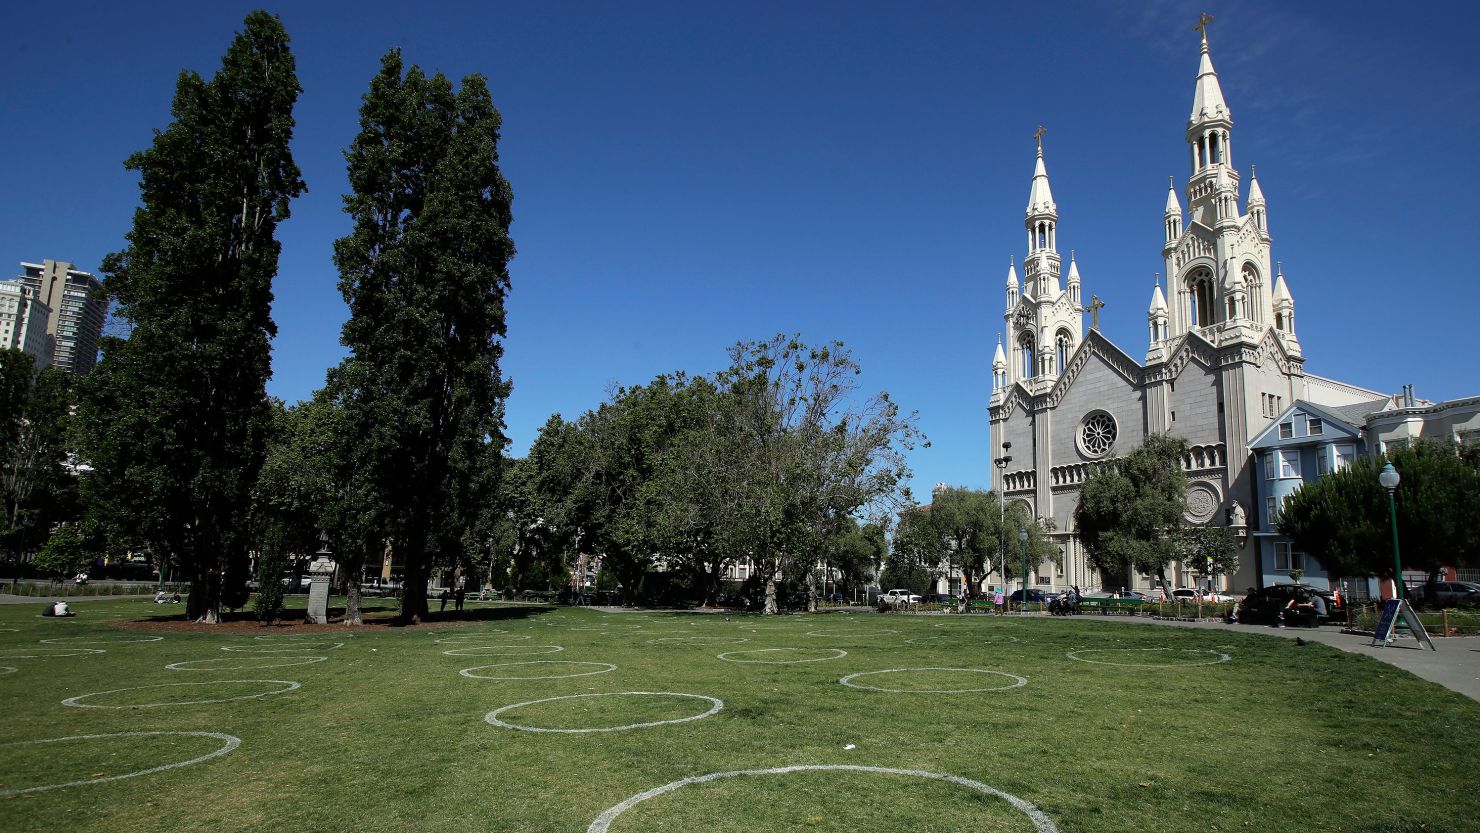 Circles designed to help prevent the spread of the coronavirus by encouraging social distancing are shown at a park in front of Saints Peter and Paul Church in San Francisco, California.